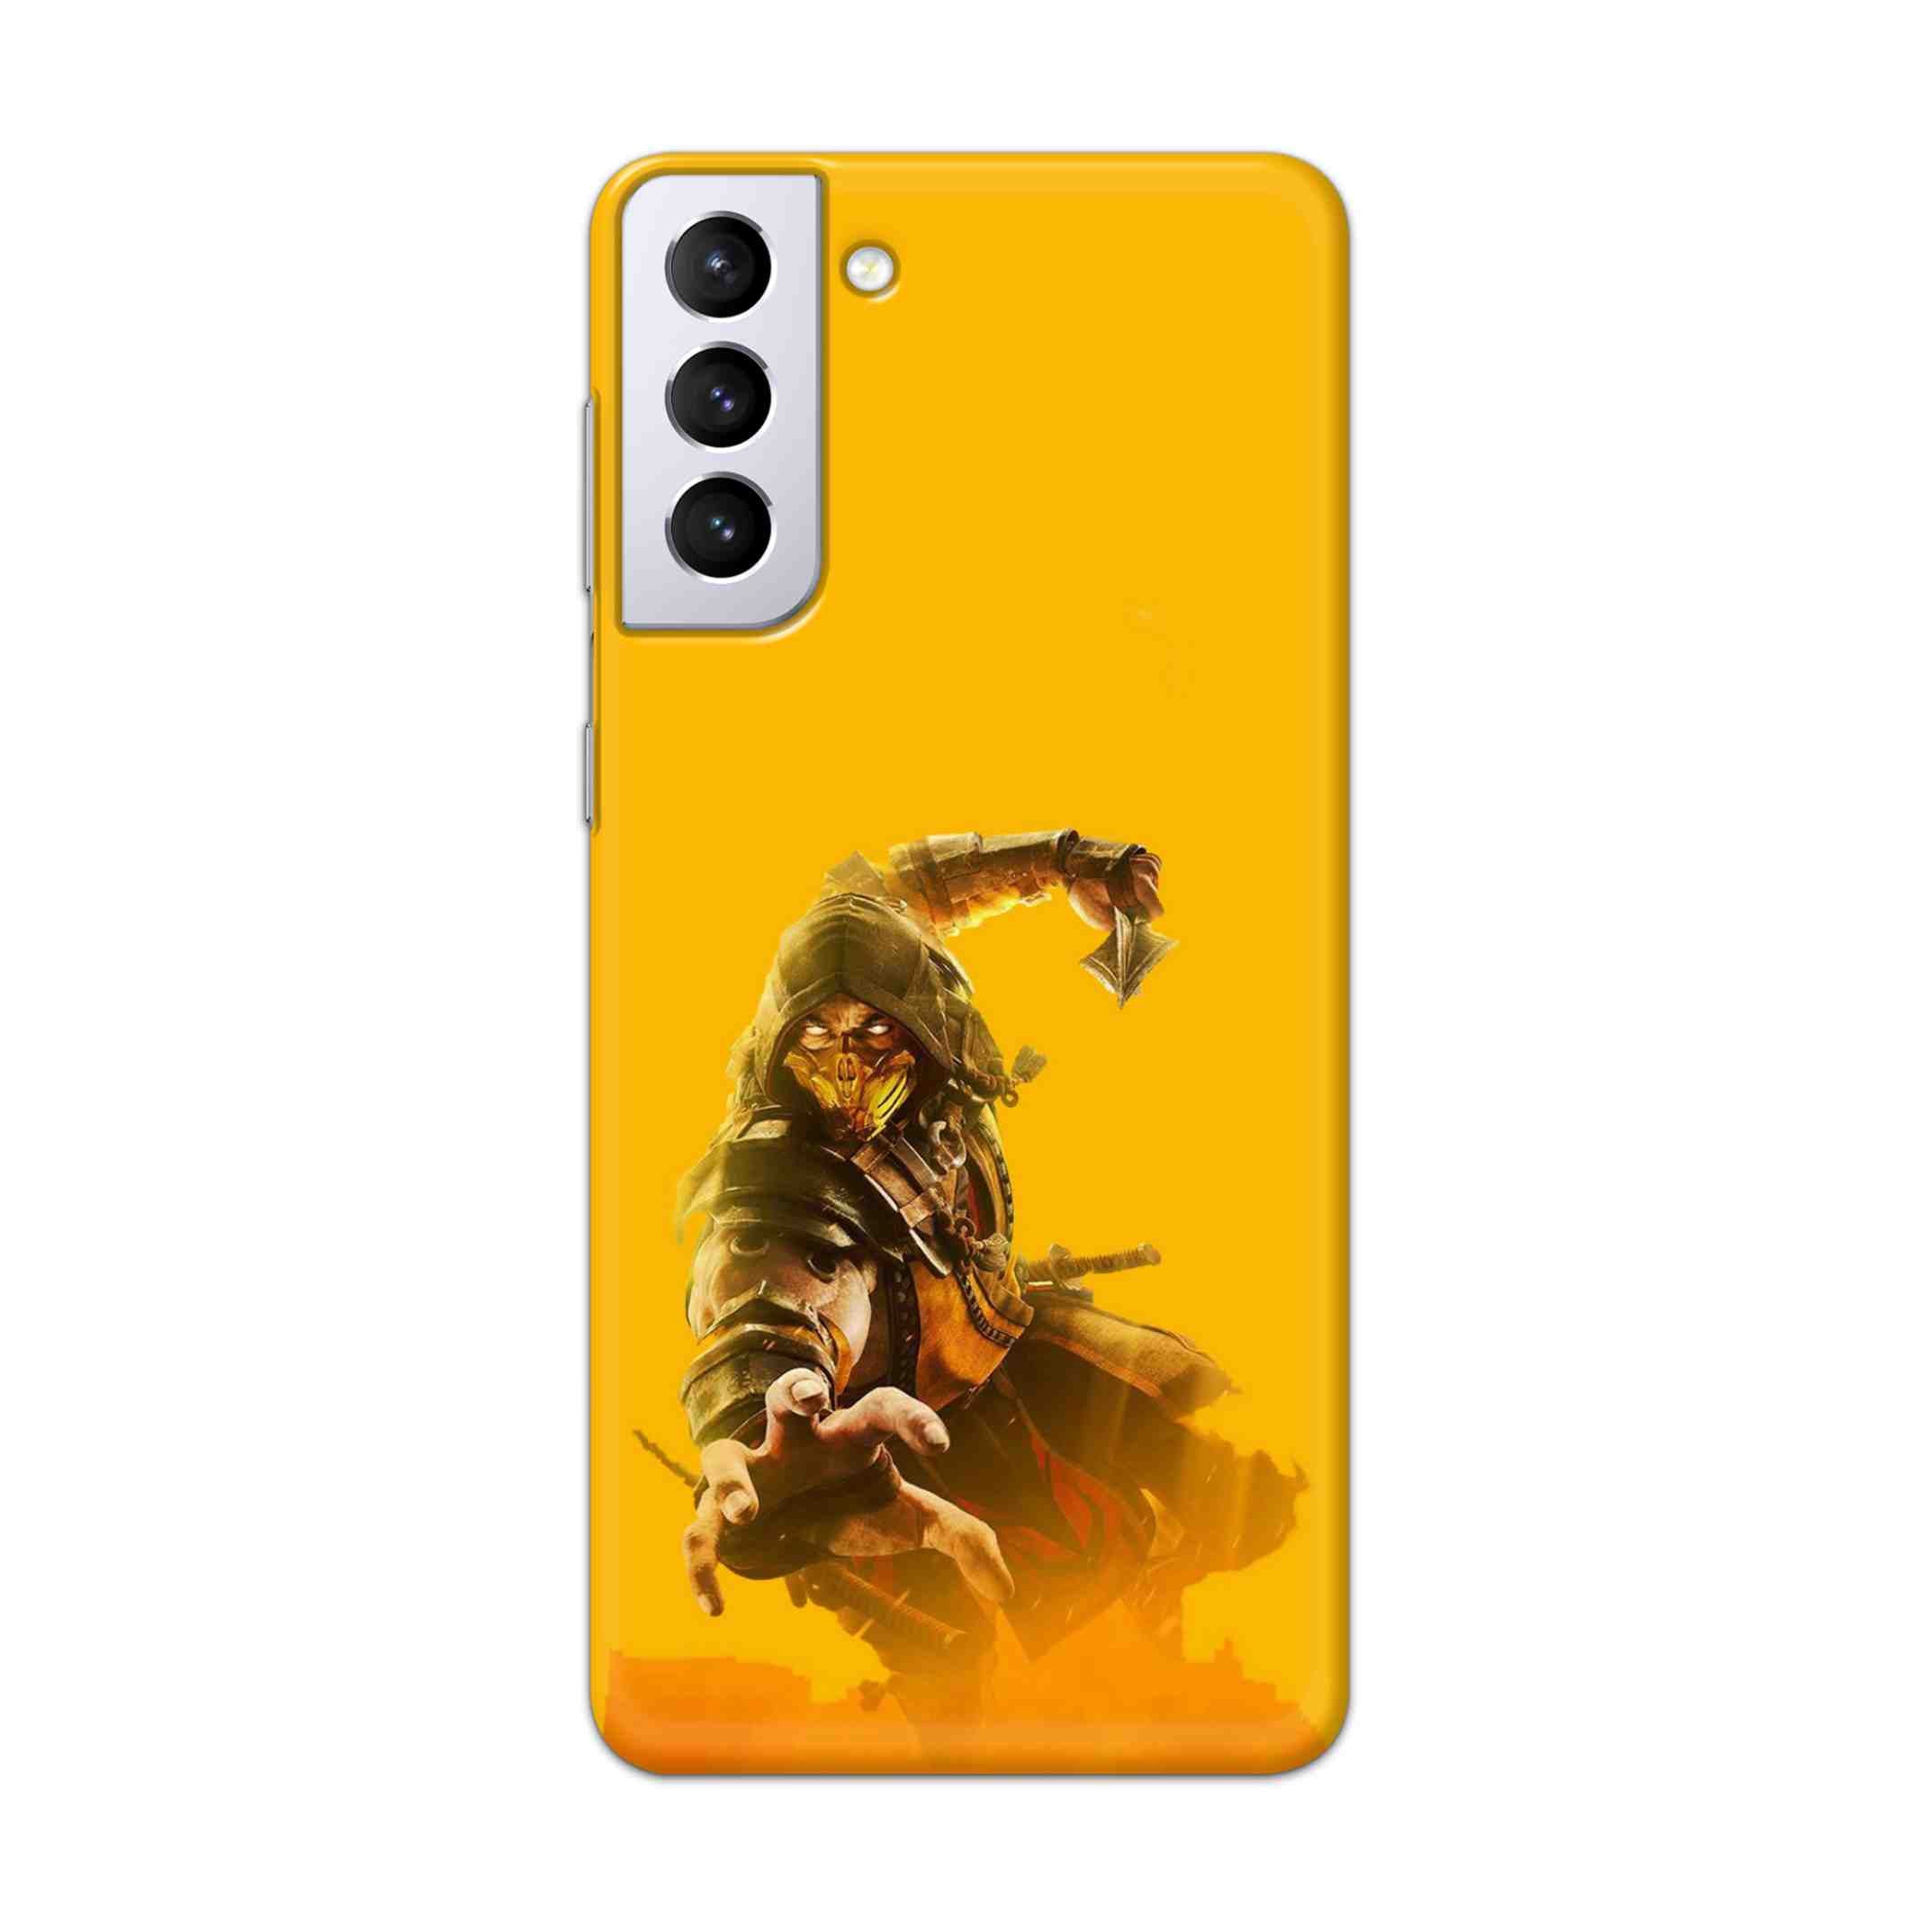 Buy Mortal Kombat Hard Back Mobile Phone Case Cover For Samsung Galaxy S21 Plus Online